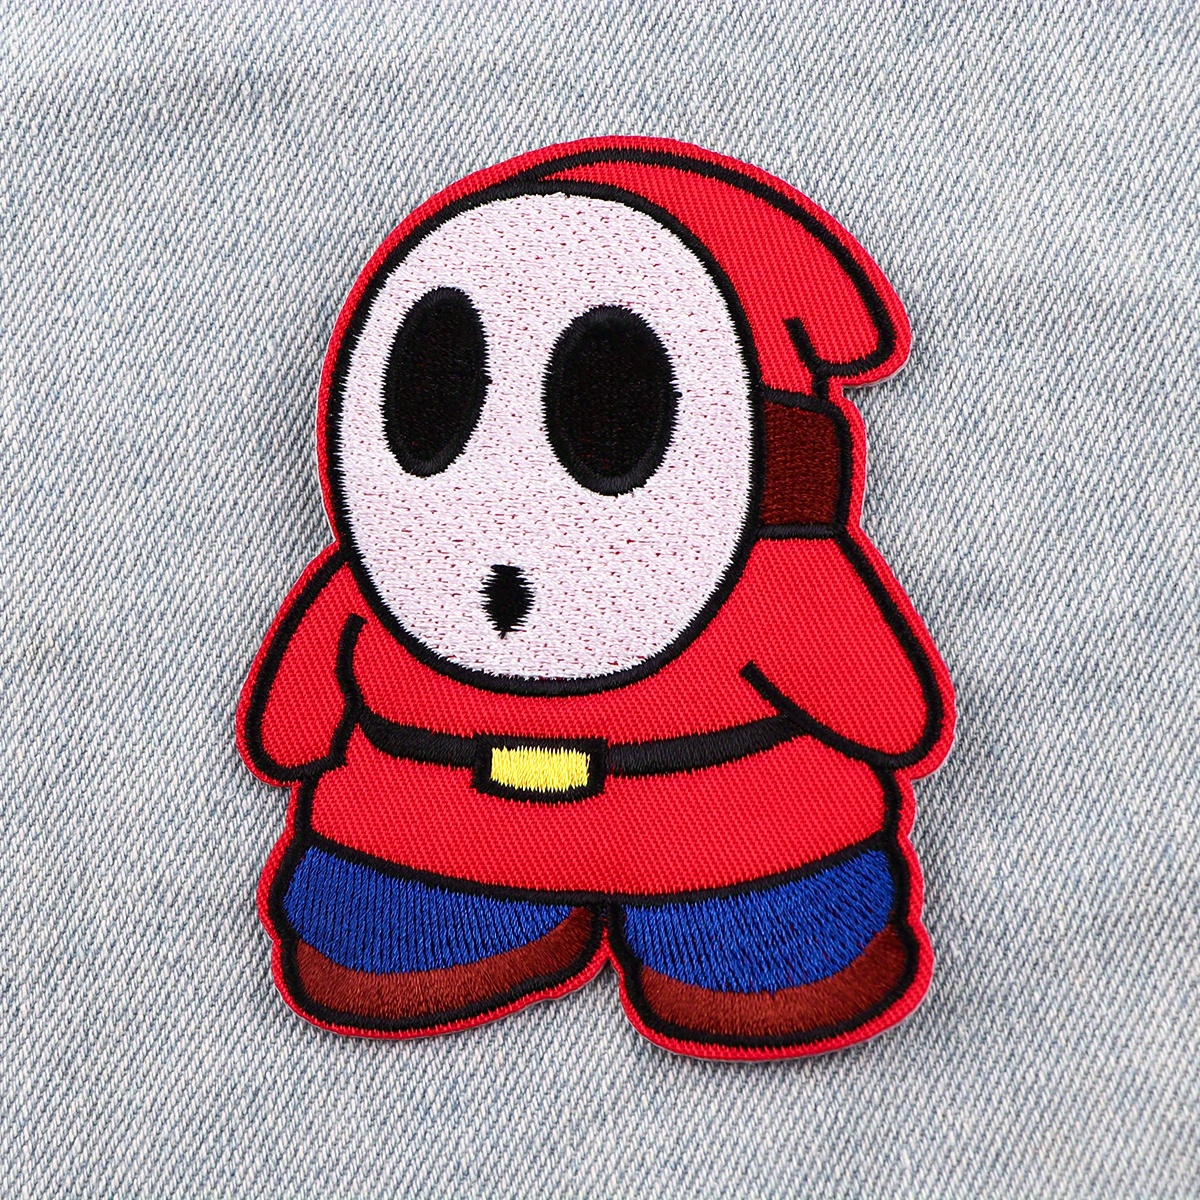  Anime Kitty Patches Anime Iron on/Sew on Patches Embroidered Patches  for DIY Jeans, Jackets, Shirts, Bag, Caps (5 pcs) : Arts, Crafts & Sewing